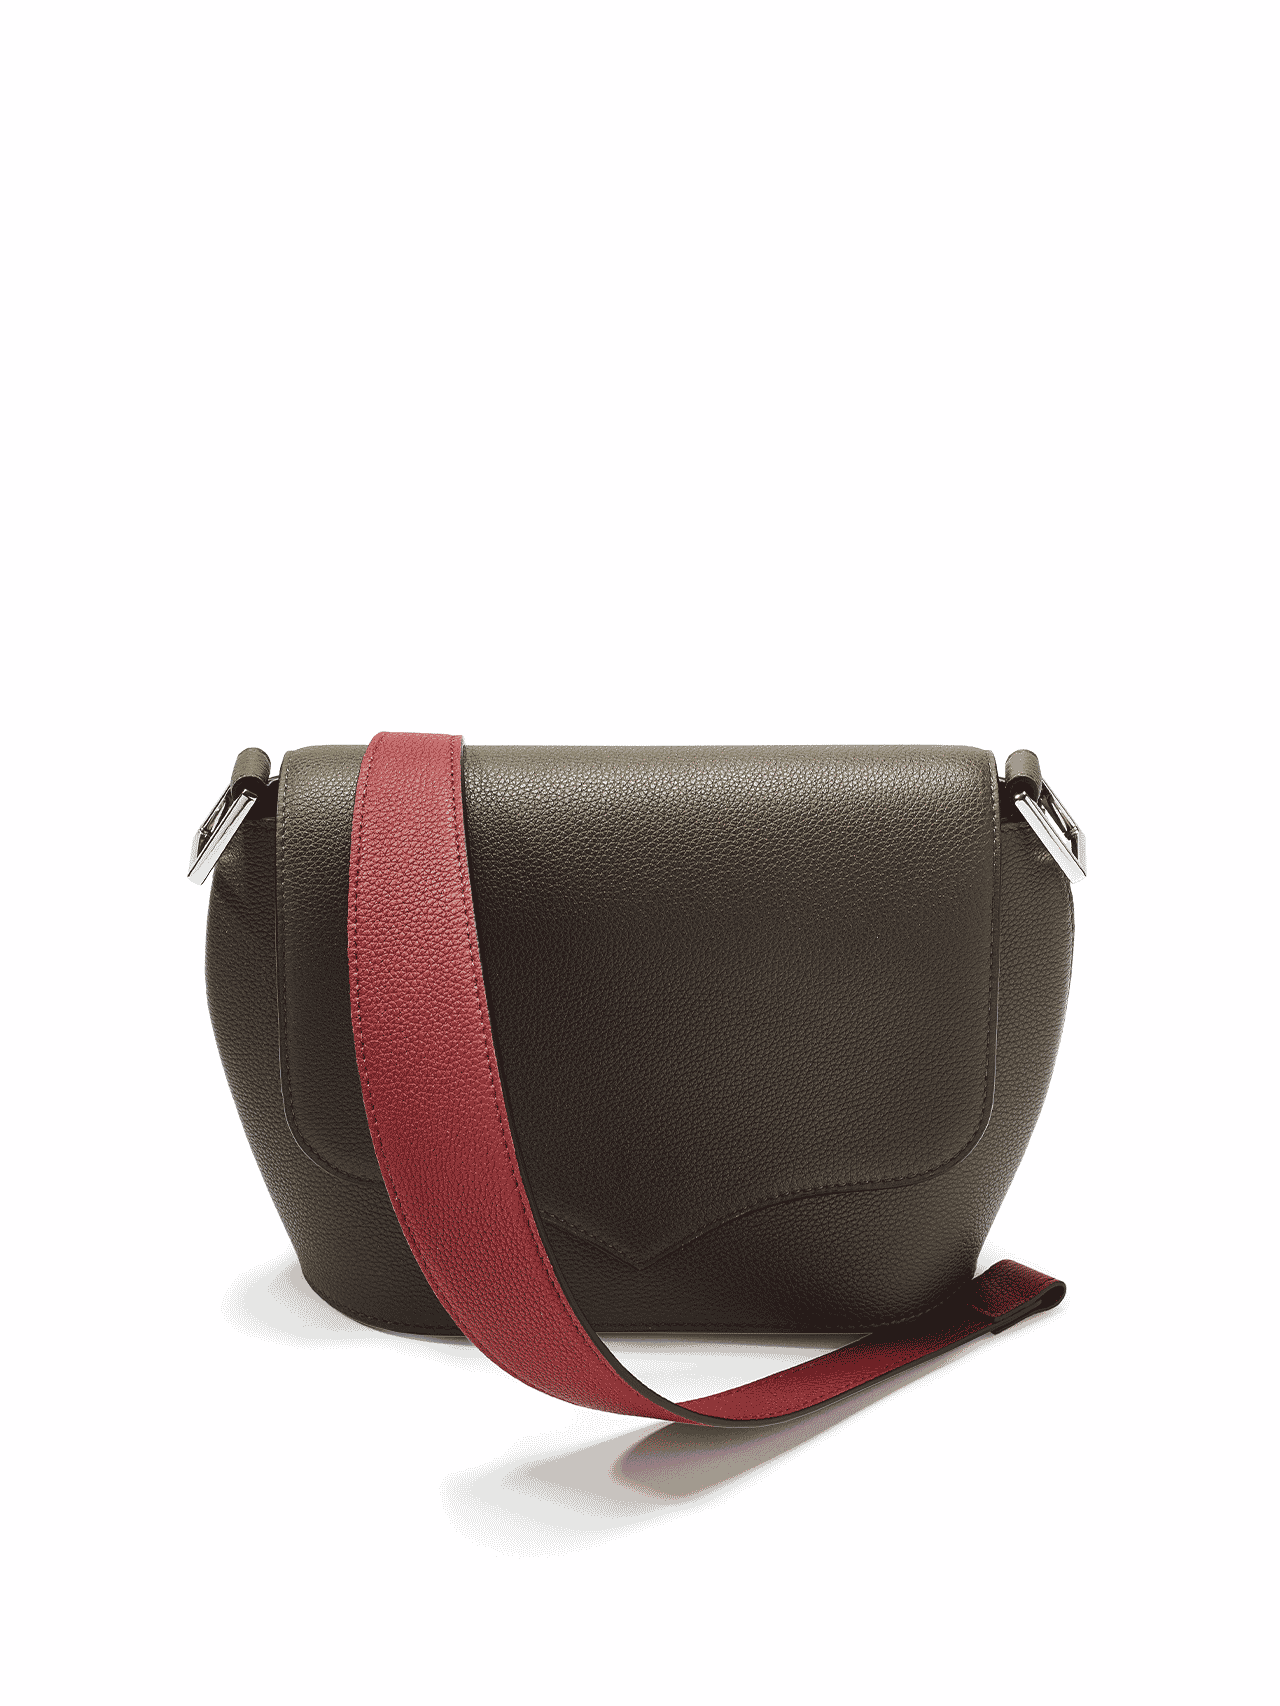 bag leather jean rousseau brown red